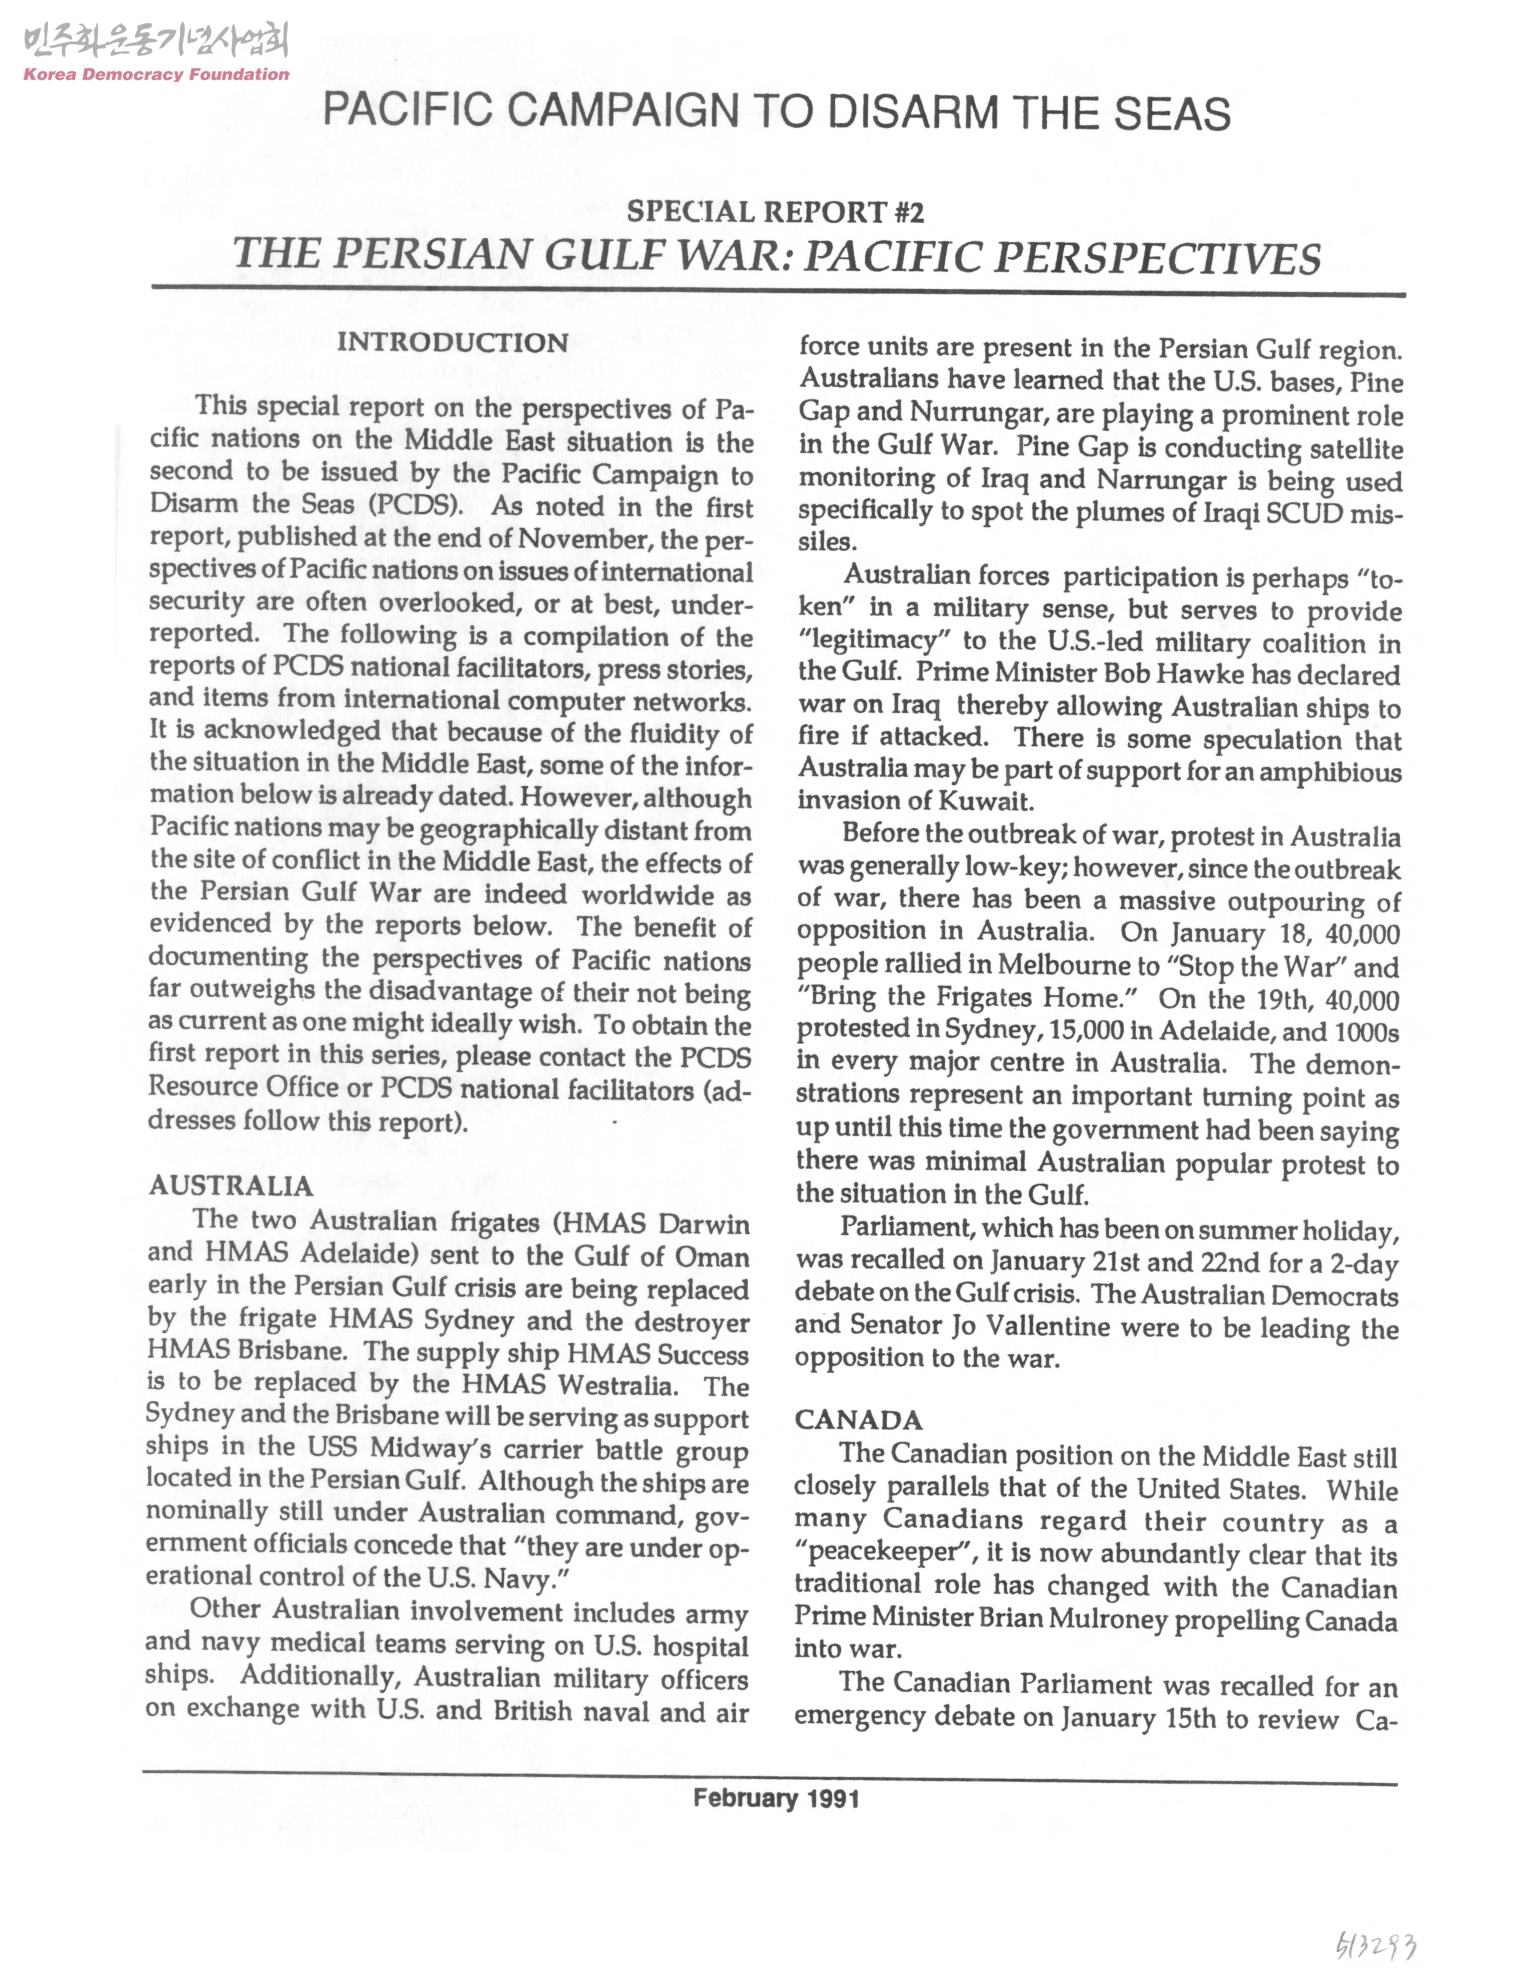 Special Report 2 The Persian Gulf War Pacific Perspectives